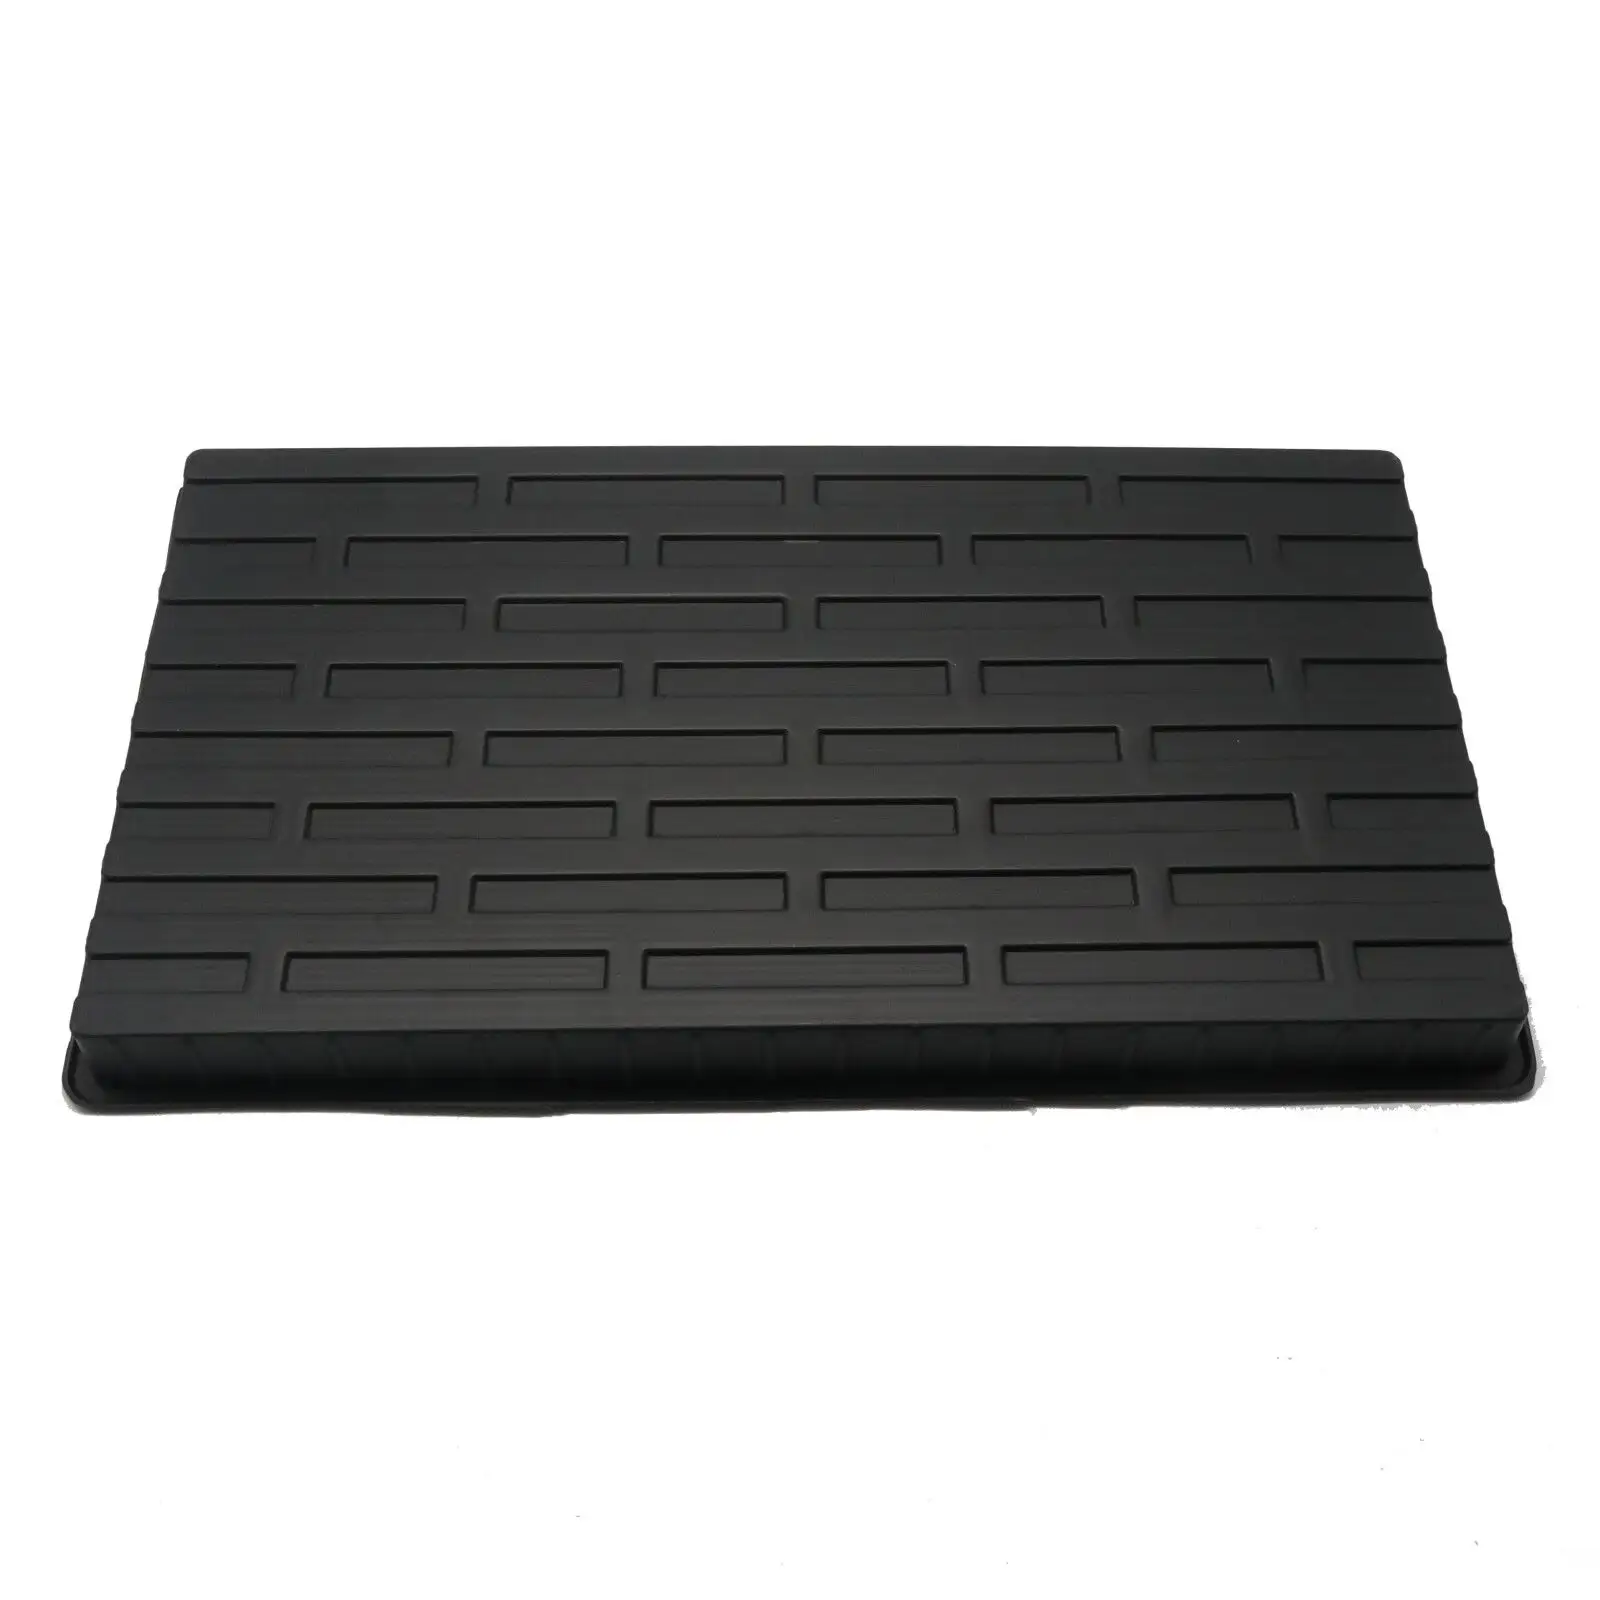 High Quality Plastic Black PS Extra Strength Deep Flat Shallow nursery tray Starting Plant Germination Tray for Microgreens